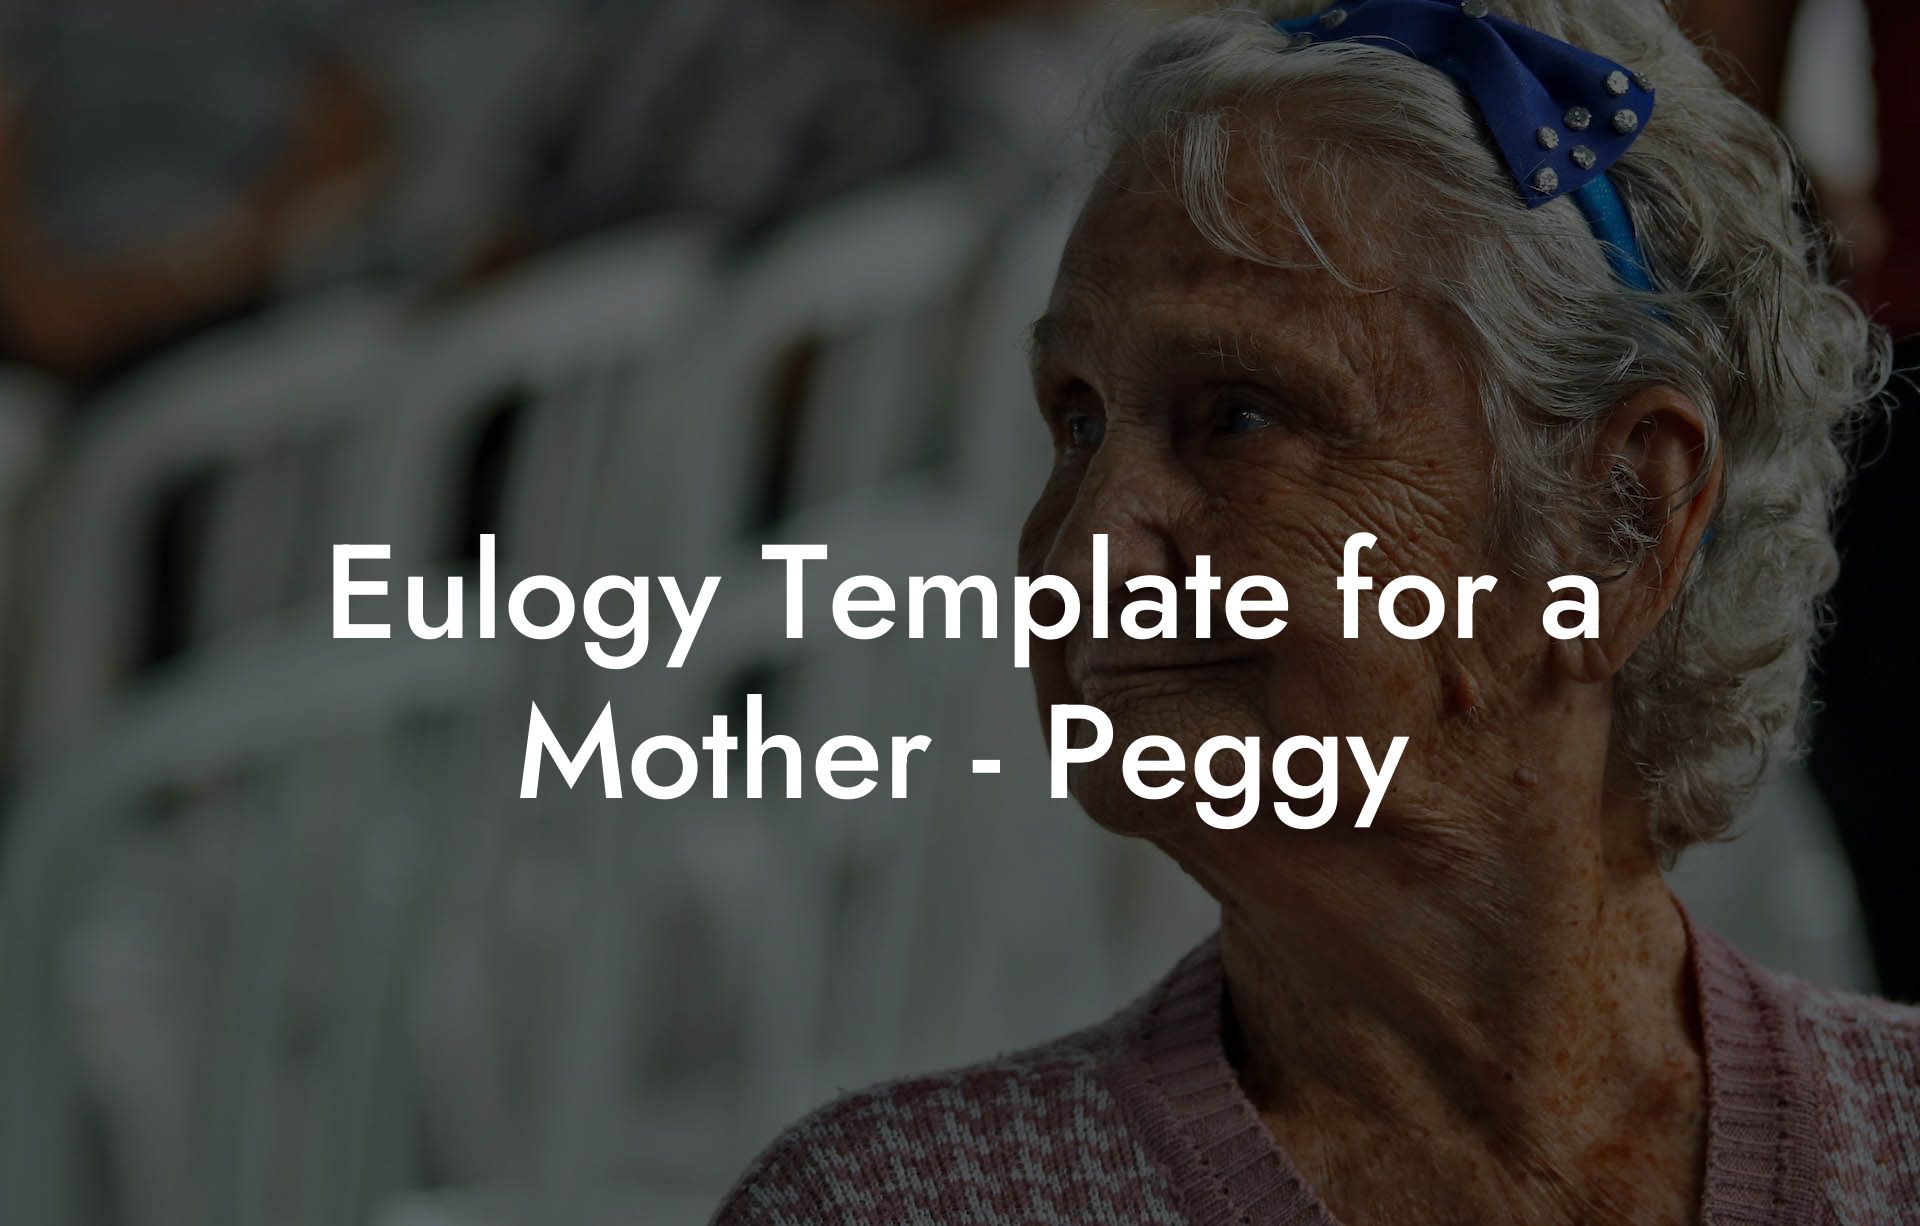 Eulogy Template for a Mother - Peggy